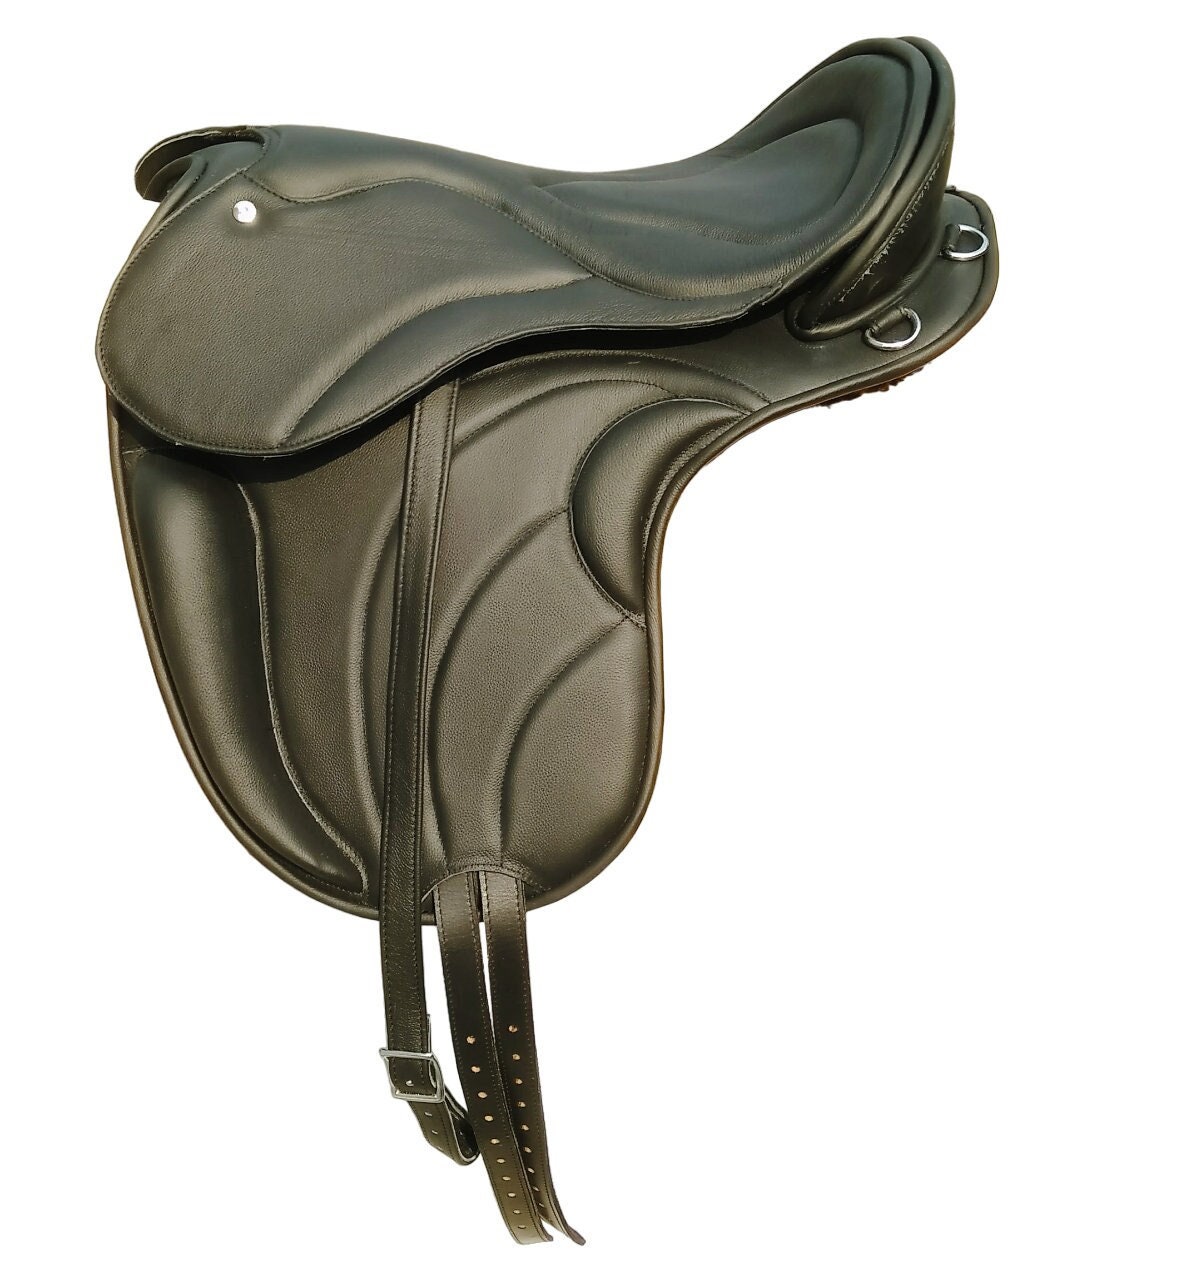 EuroPlus English Leather Dressage treeless Saddles black in 18" with Stirrup leather and Stirrup Bars. - Free Shipping